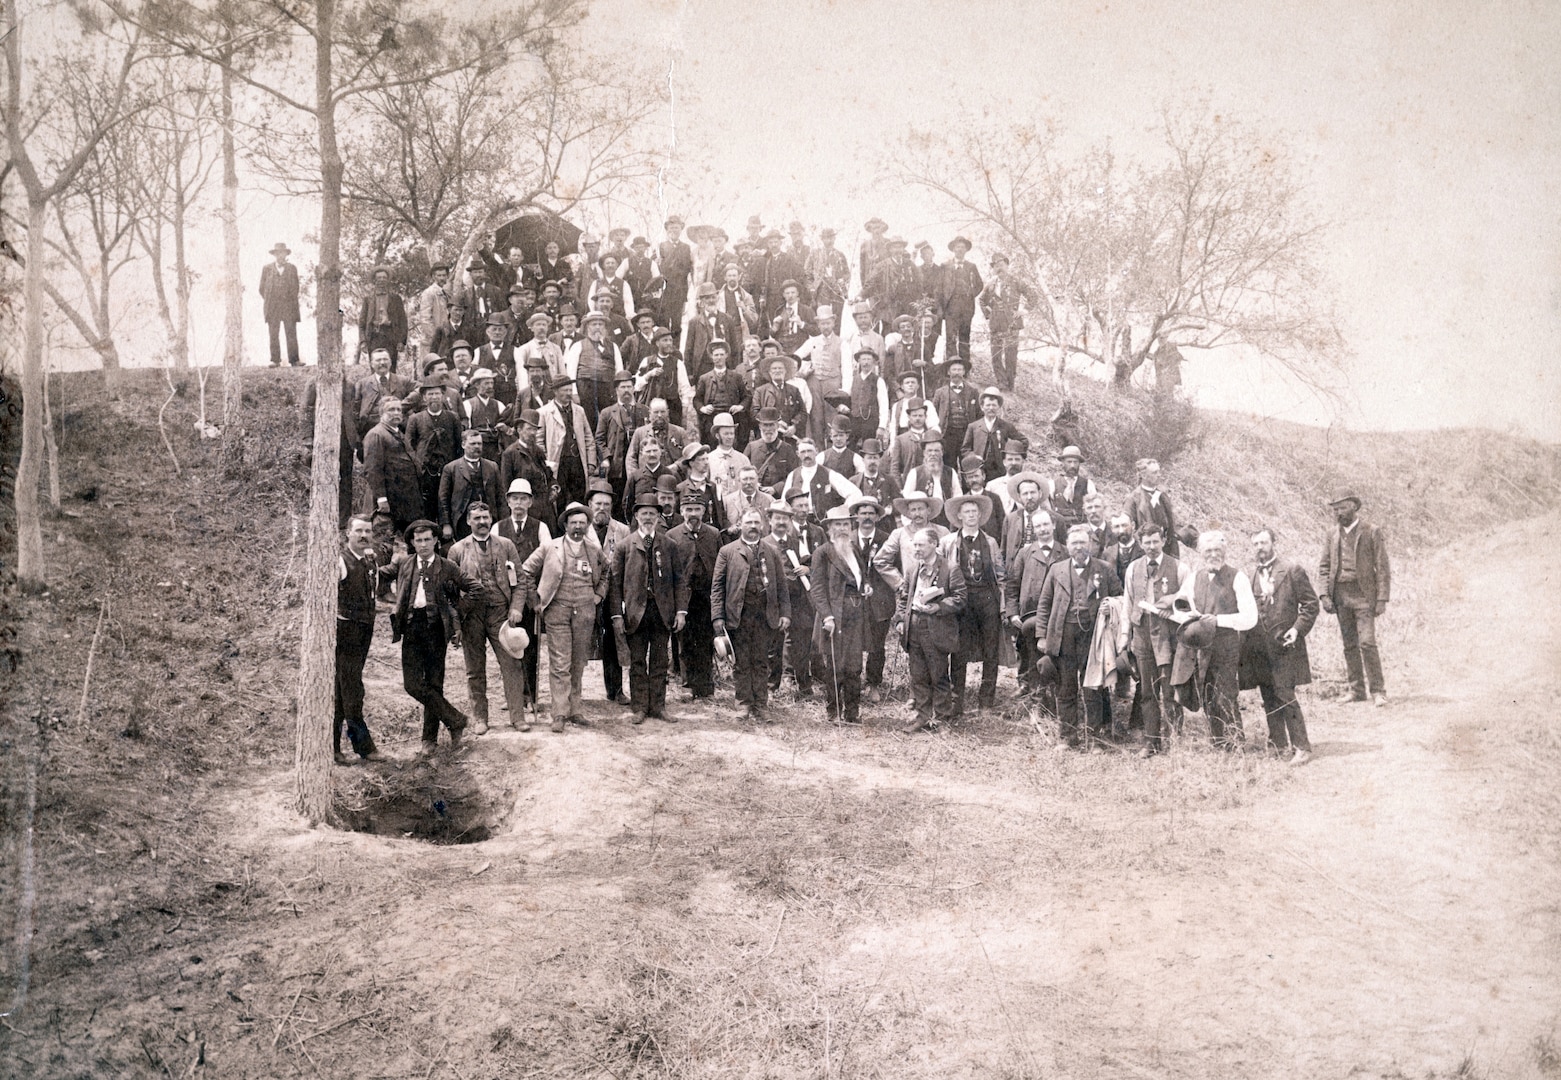 Civil War veterans of 57th Massachusetts Infantry Regiment pose with Confederate General William Mahone on May 3, 1887, at crater caused by Union Soldiers exploding mine at Petersburg, Virginia (Library of Congress/William H. Tipton)